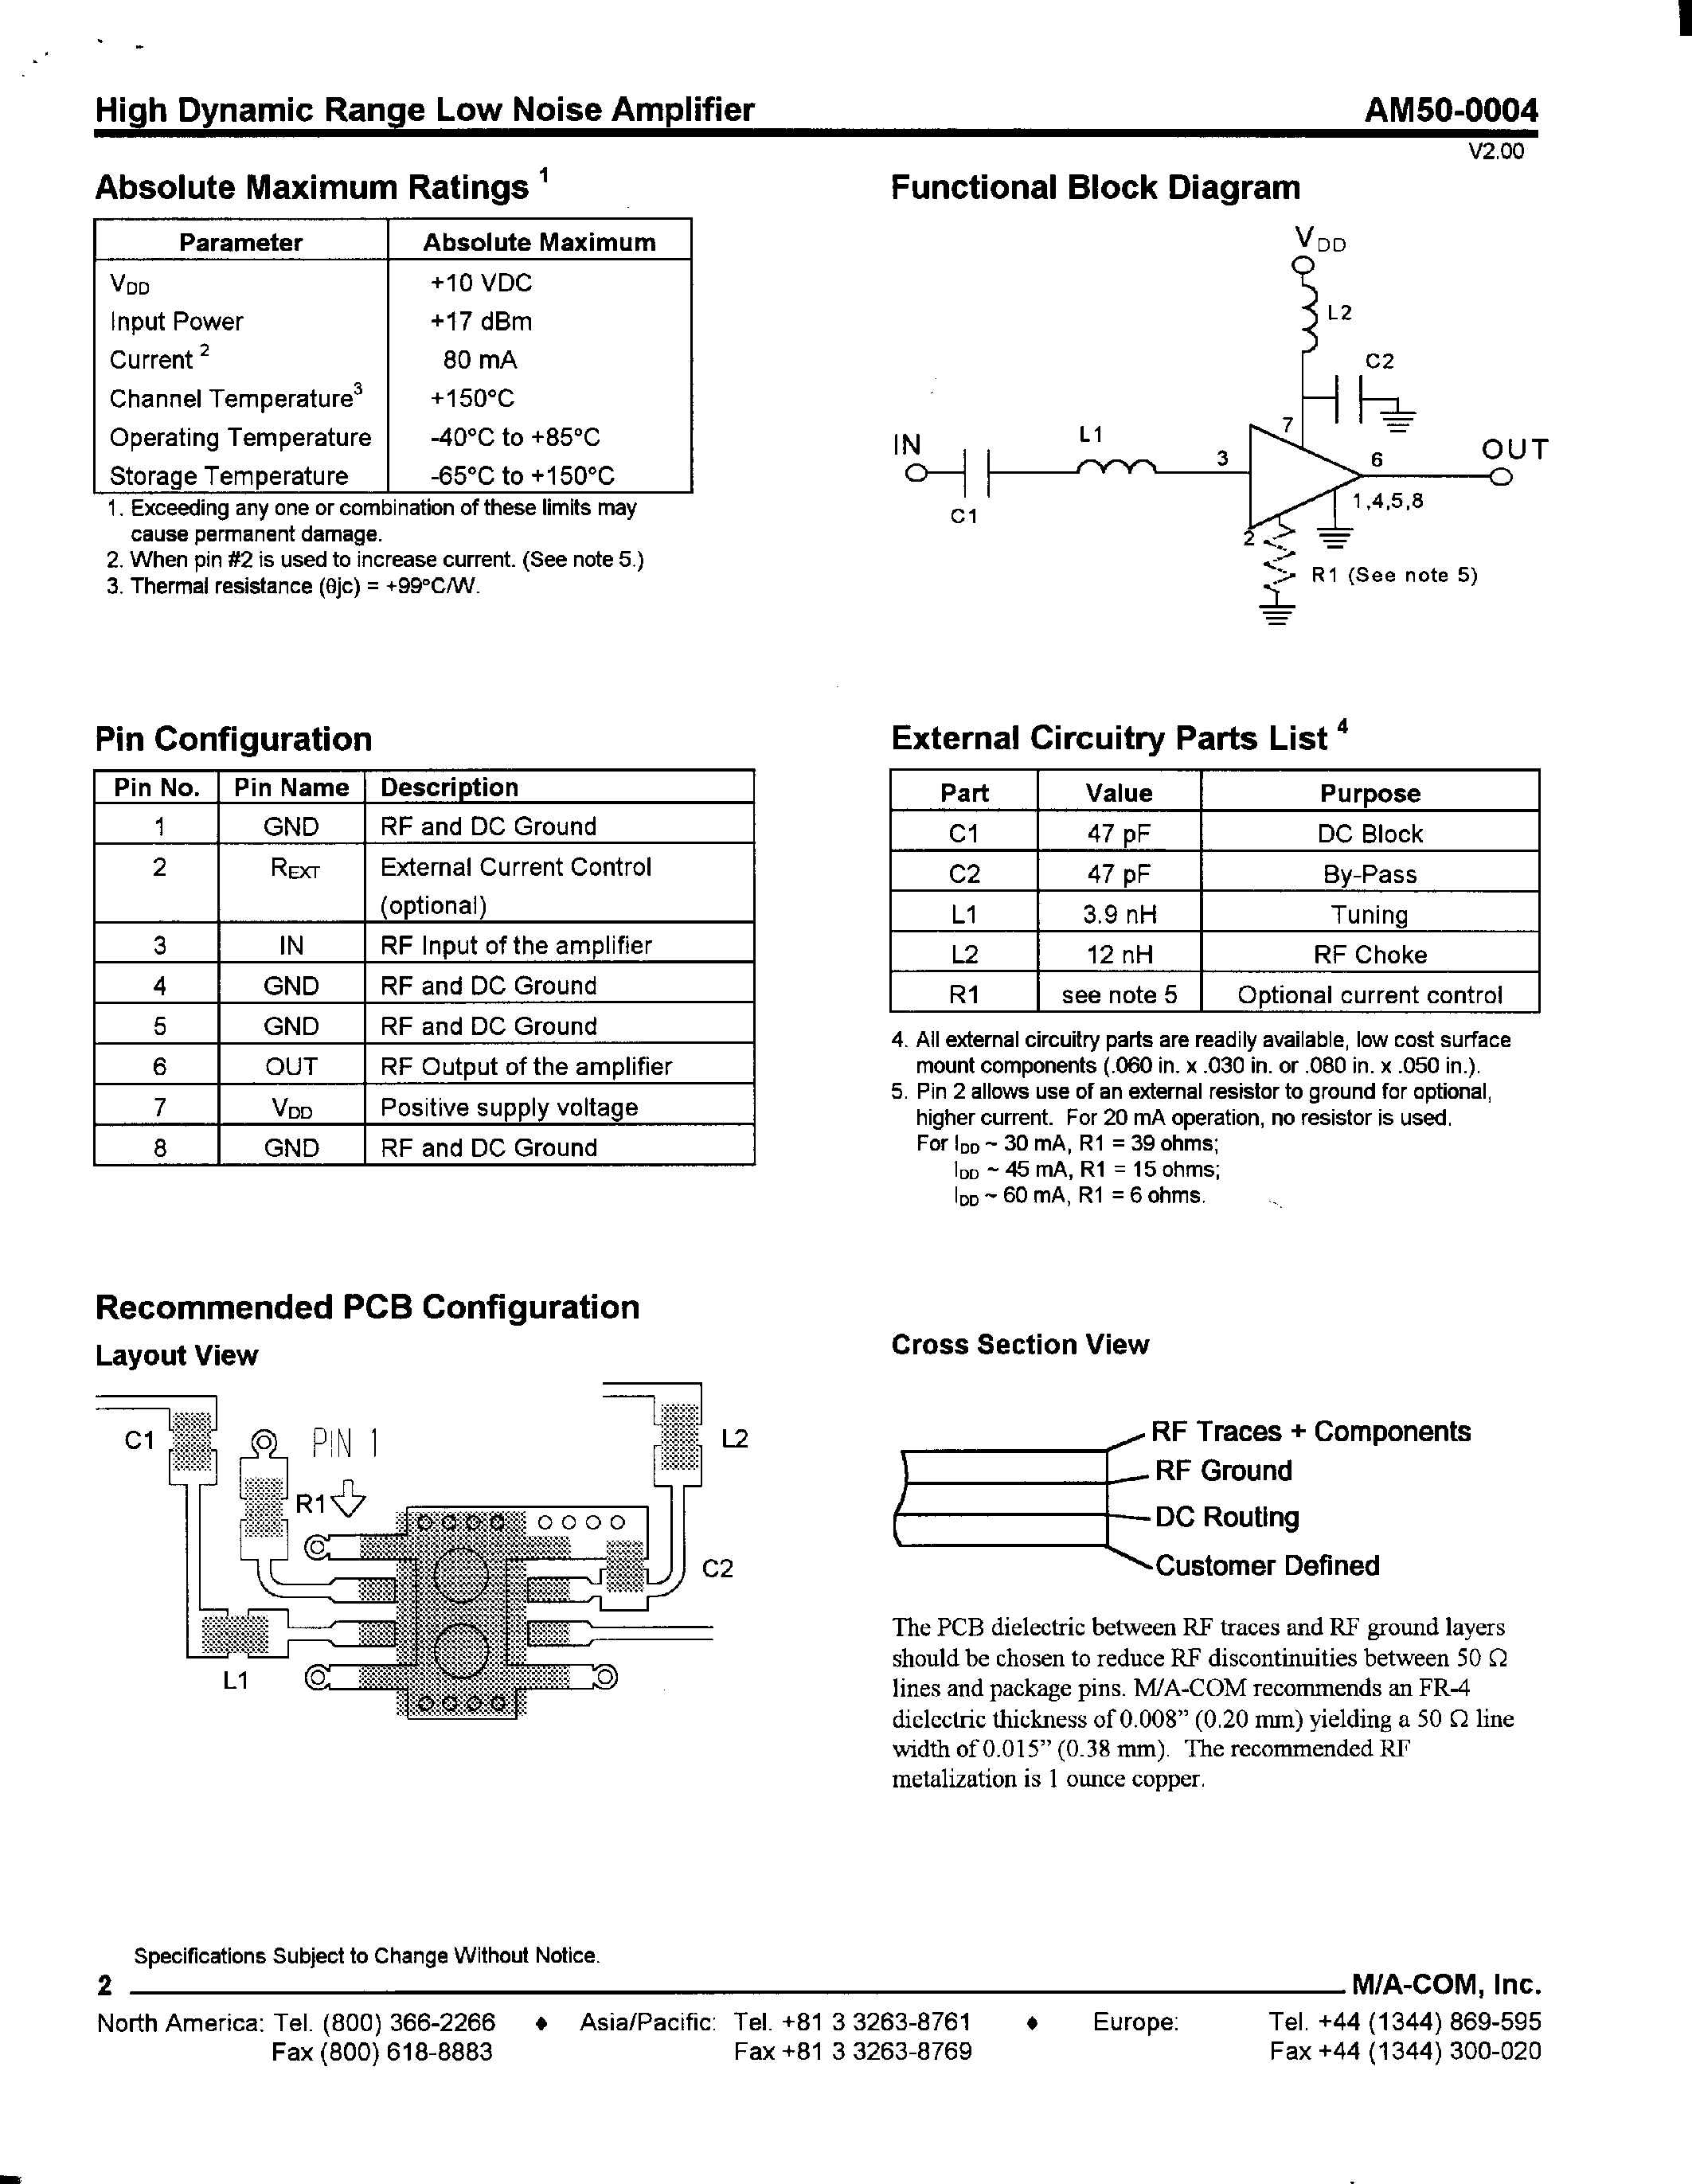 Datasheet AM50-0004TR - High Dynamic Range Low Noise Amplifier 1400-2000 MHz page 2